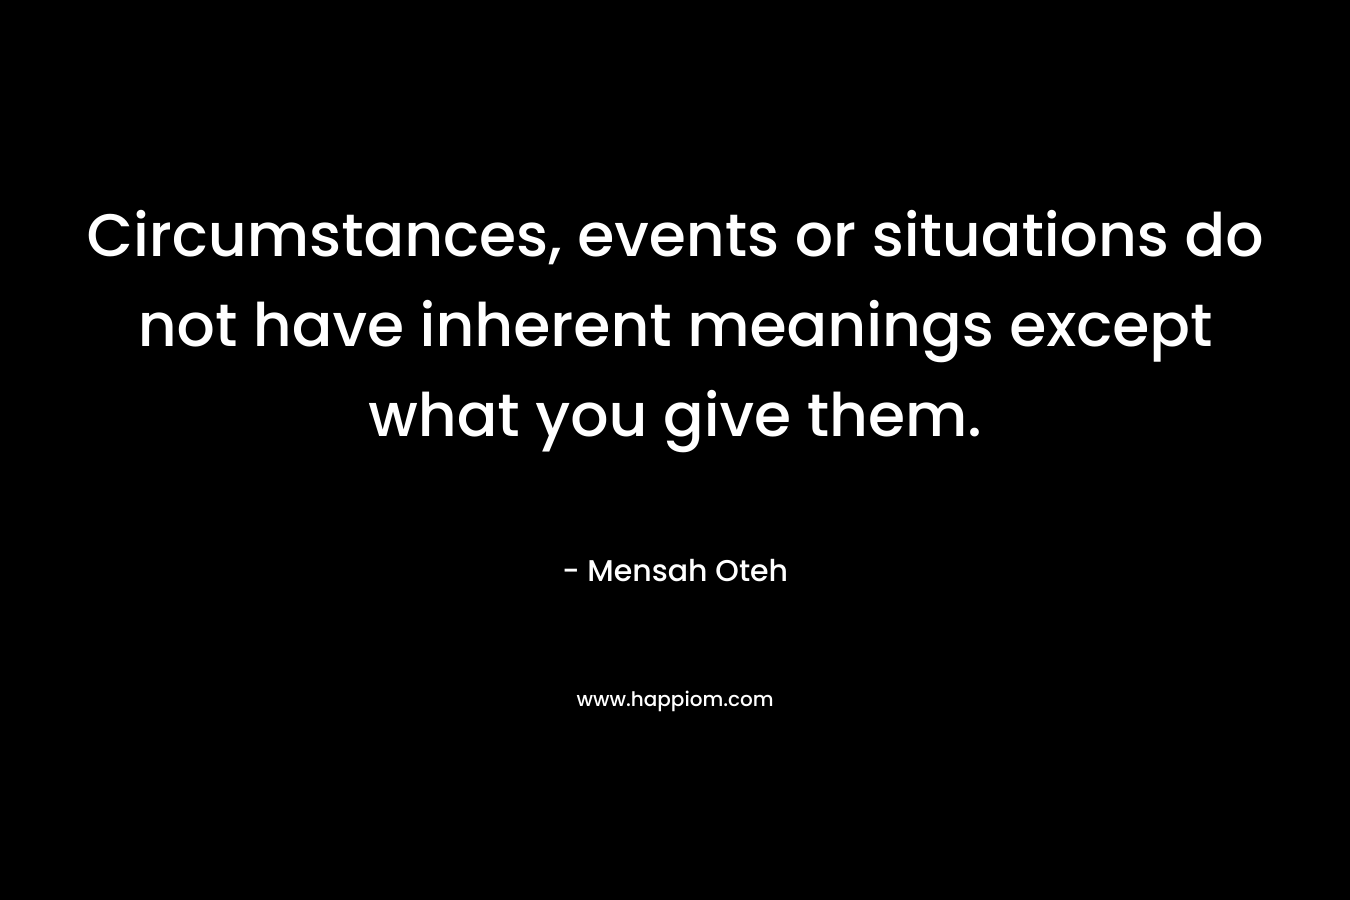 Circumstances, events or situations do not have inherent meanings except what you give them.